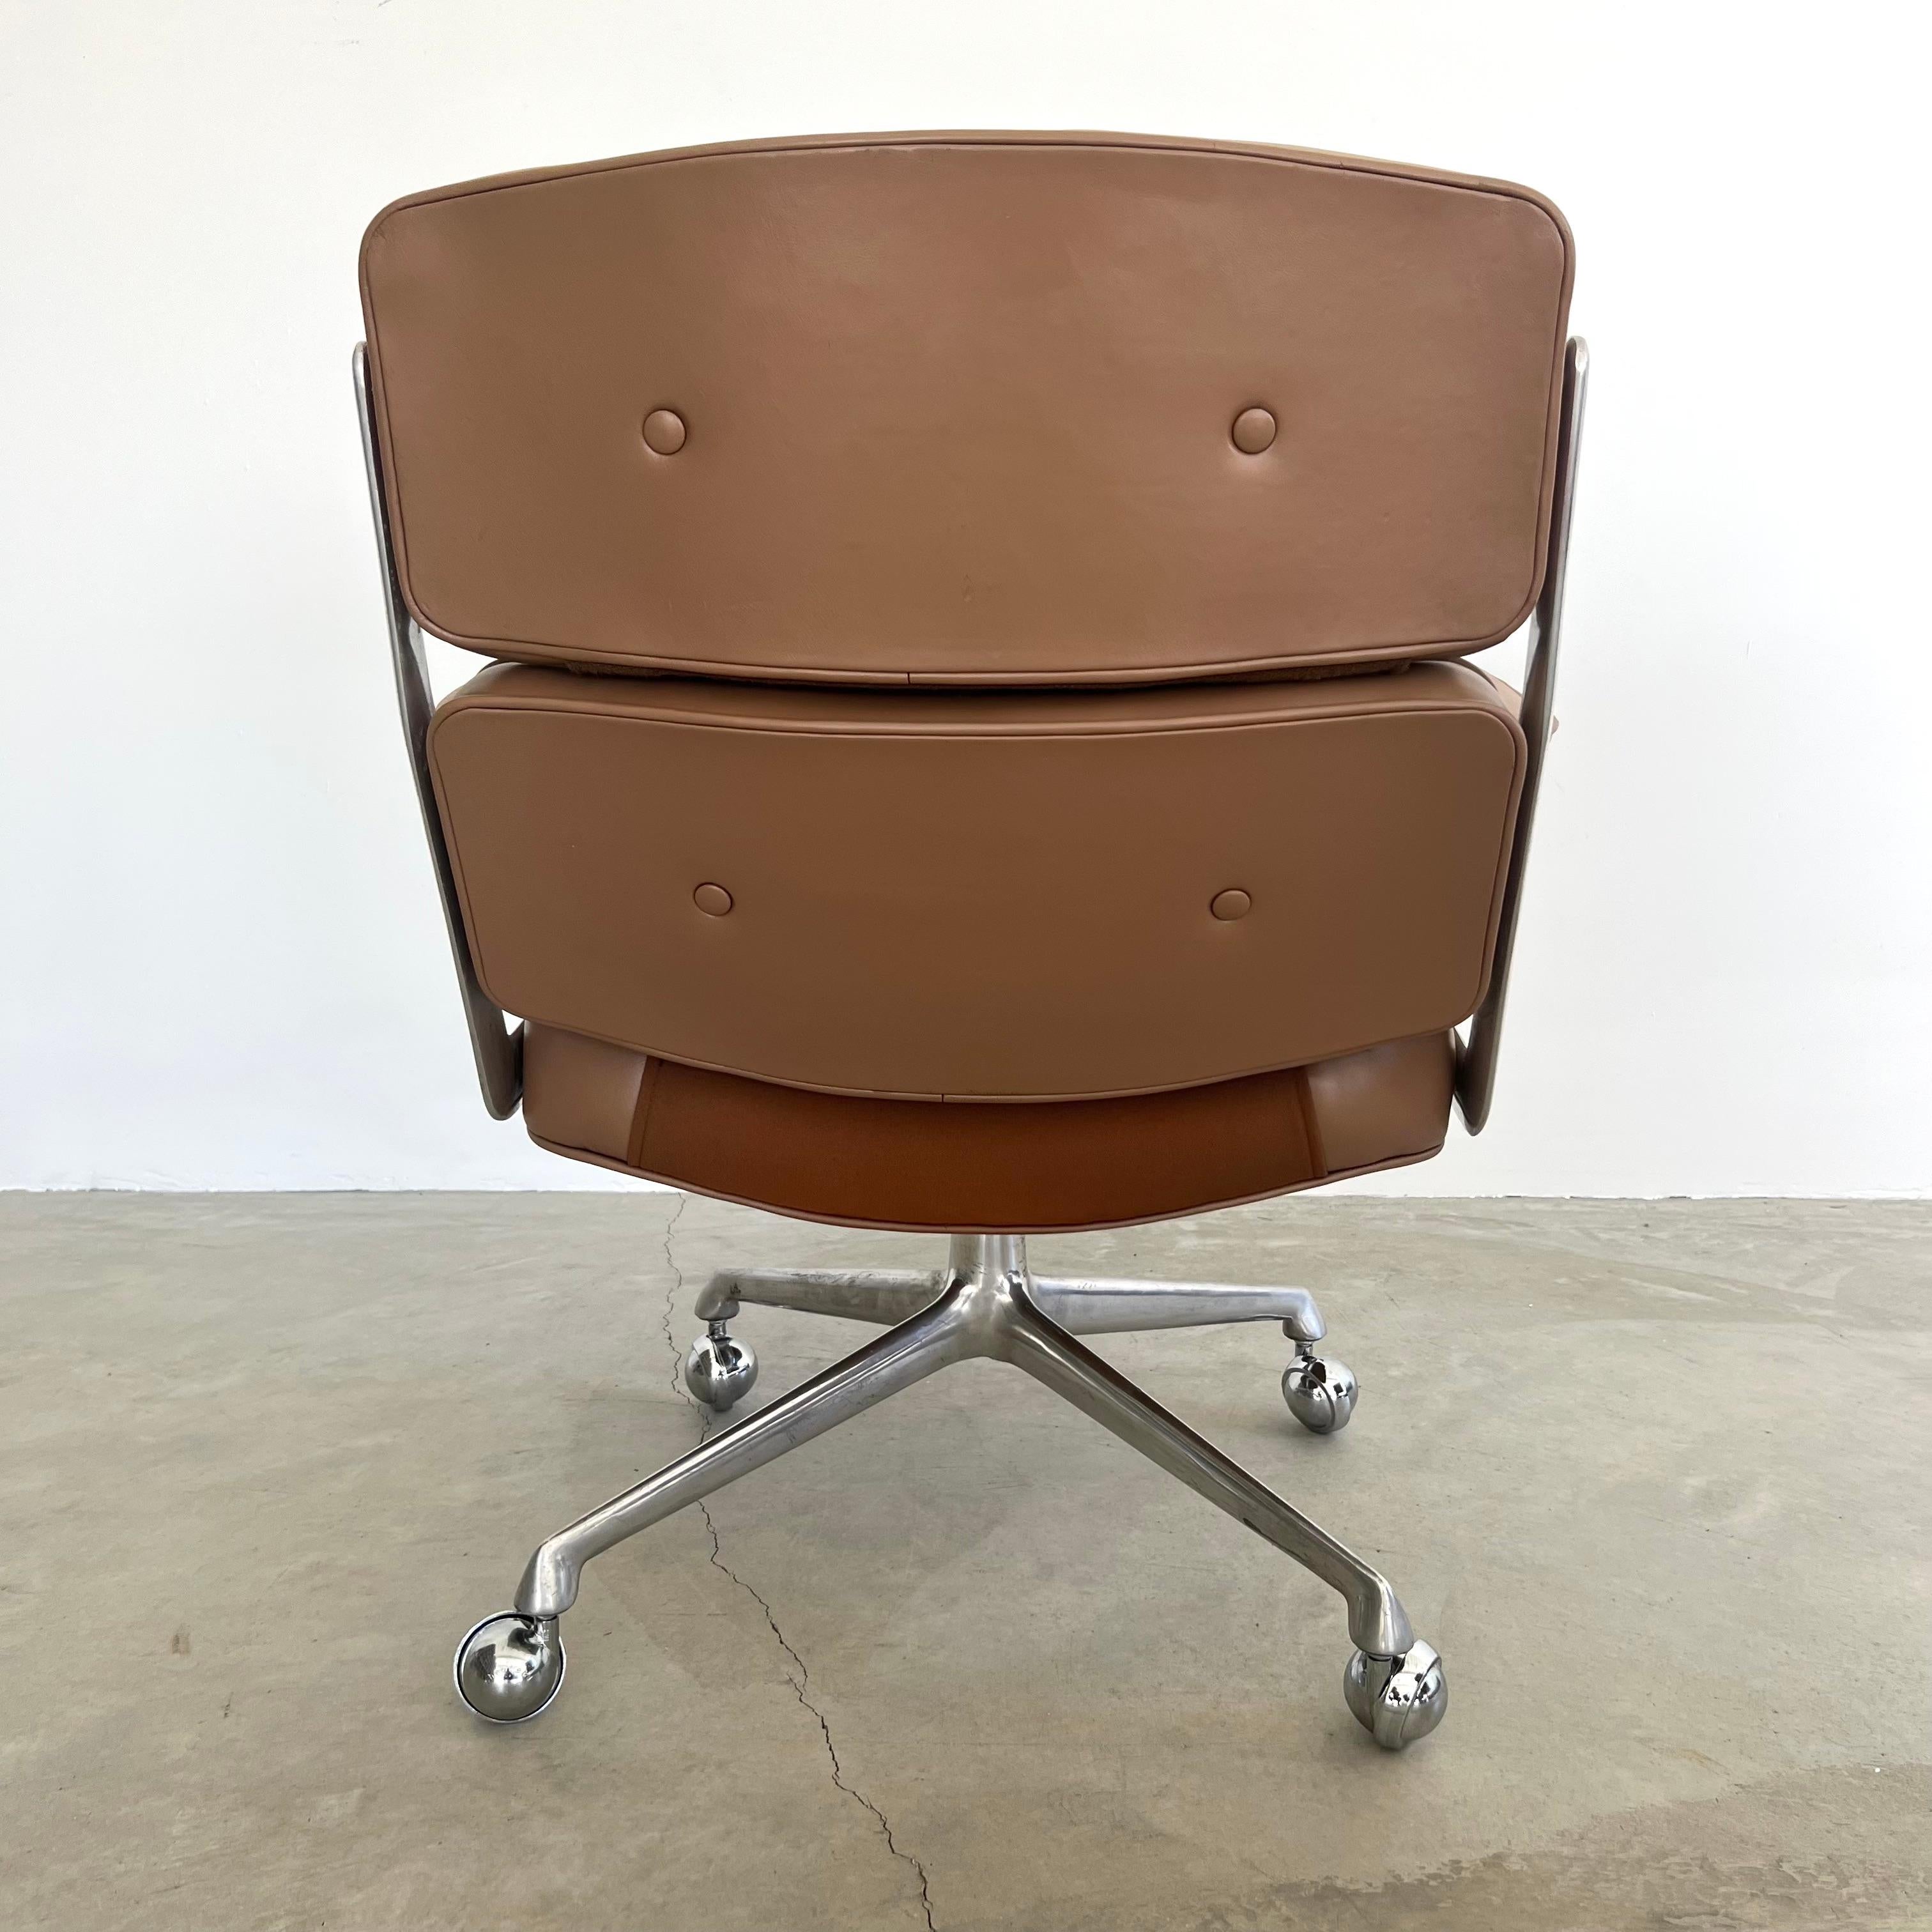 Late 20th Century Eames Time Life Chair in Tan Leather for Herman Miller, 1980s USA For Sale